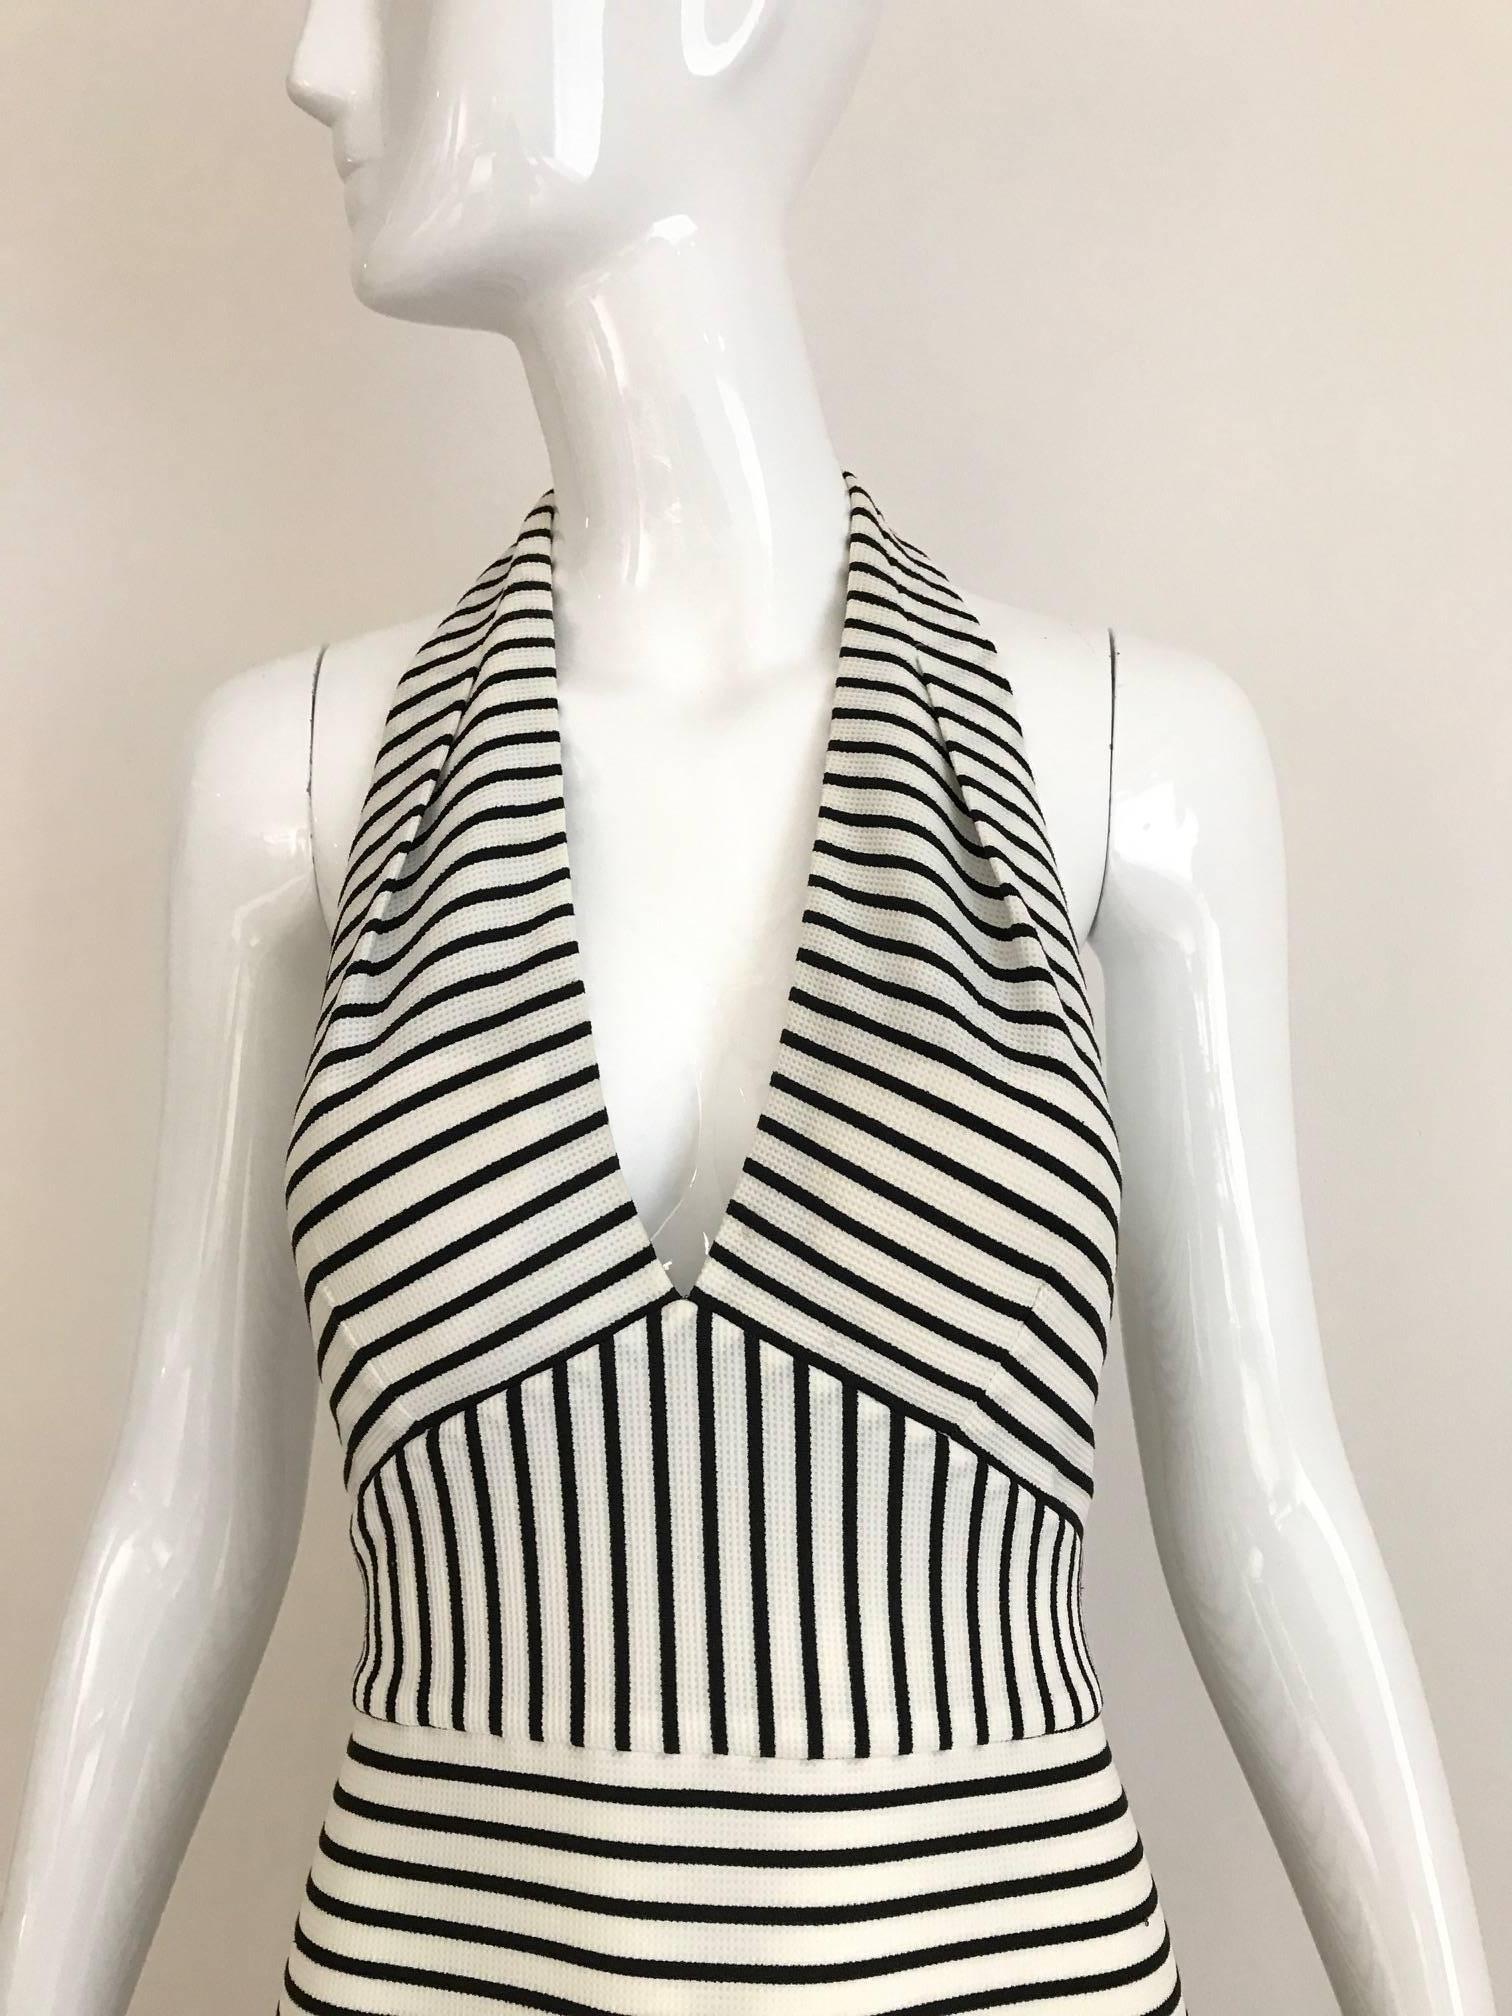  1990s Black and White Knit Stripe Nautical Halter body con maxi dress.
Perfect vacation dress.
Fit 4/6 
Bust: 34 inch/ Waist: 26 inch stretch 32 inch / Hip: 34 inch stretch to 38 inch/
 Length: 54 inch